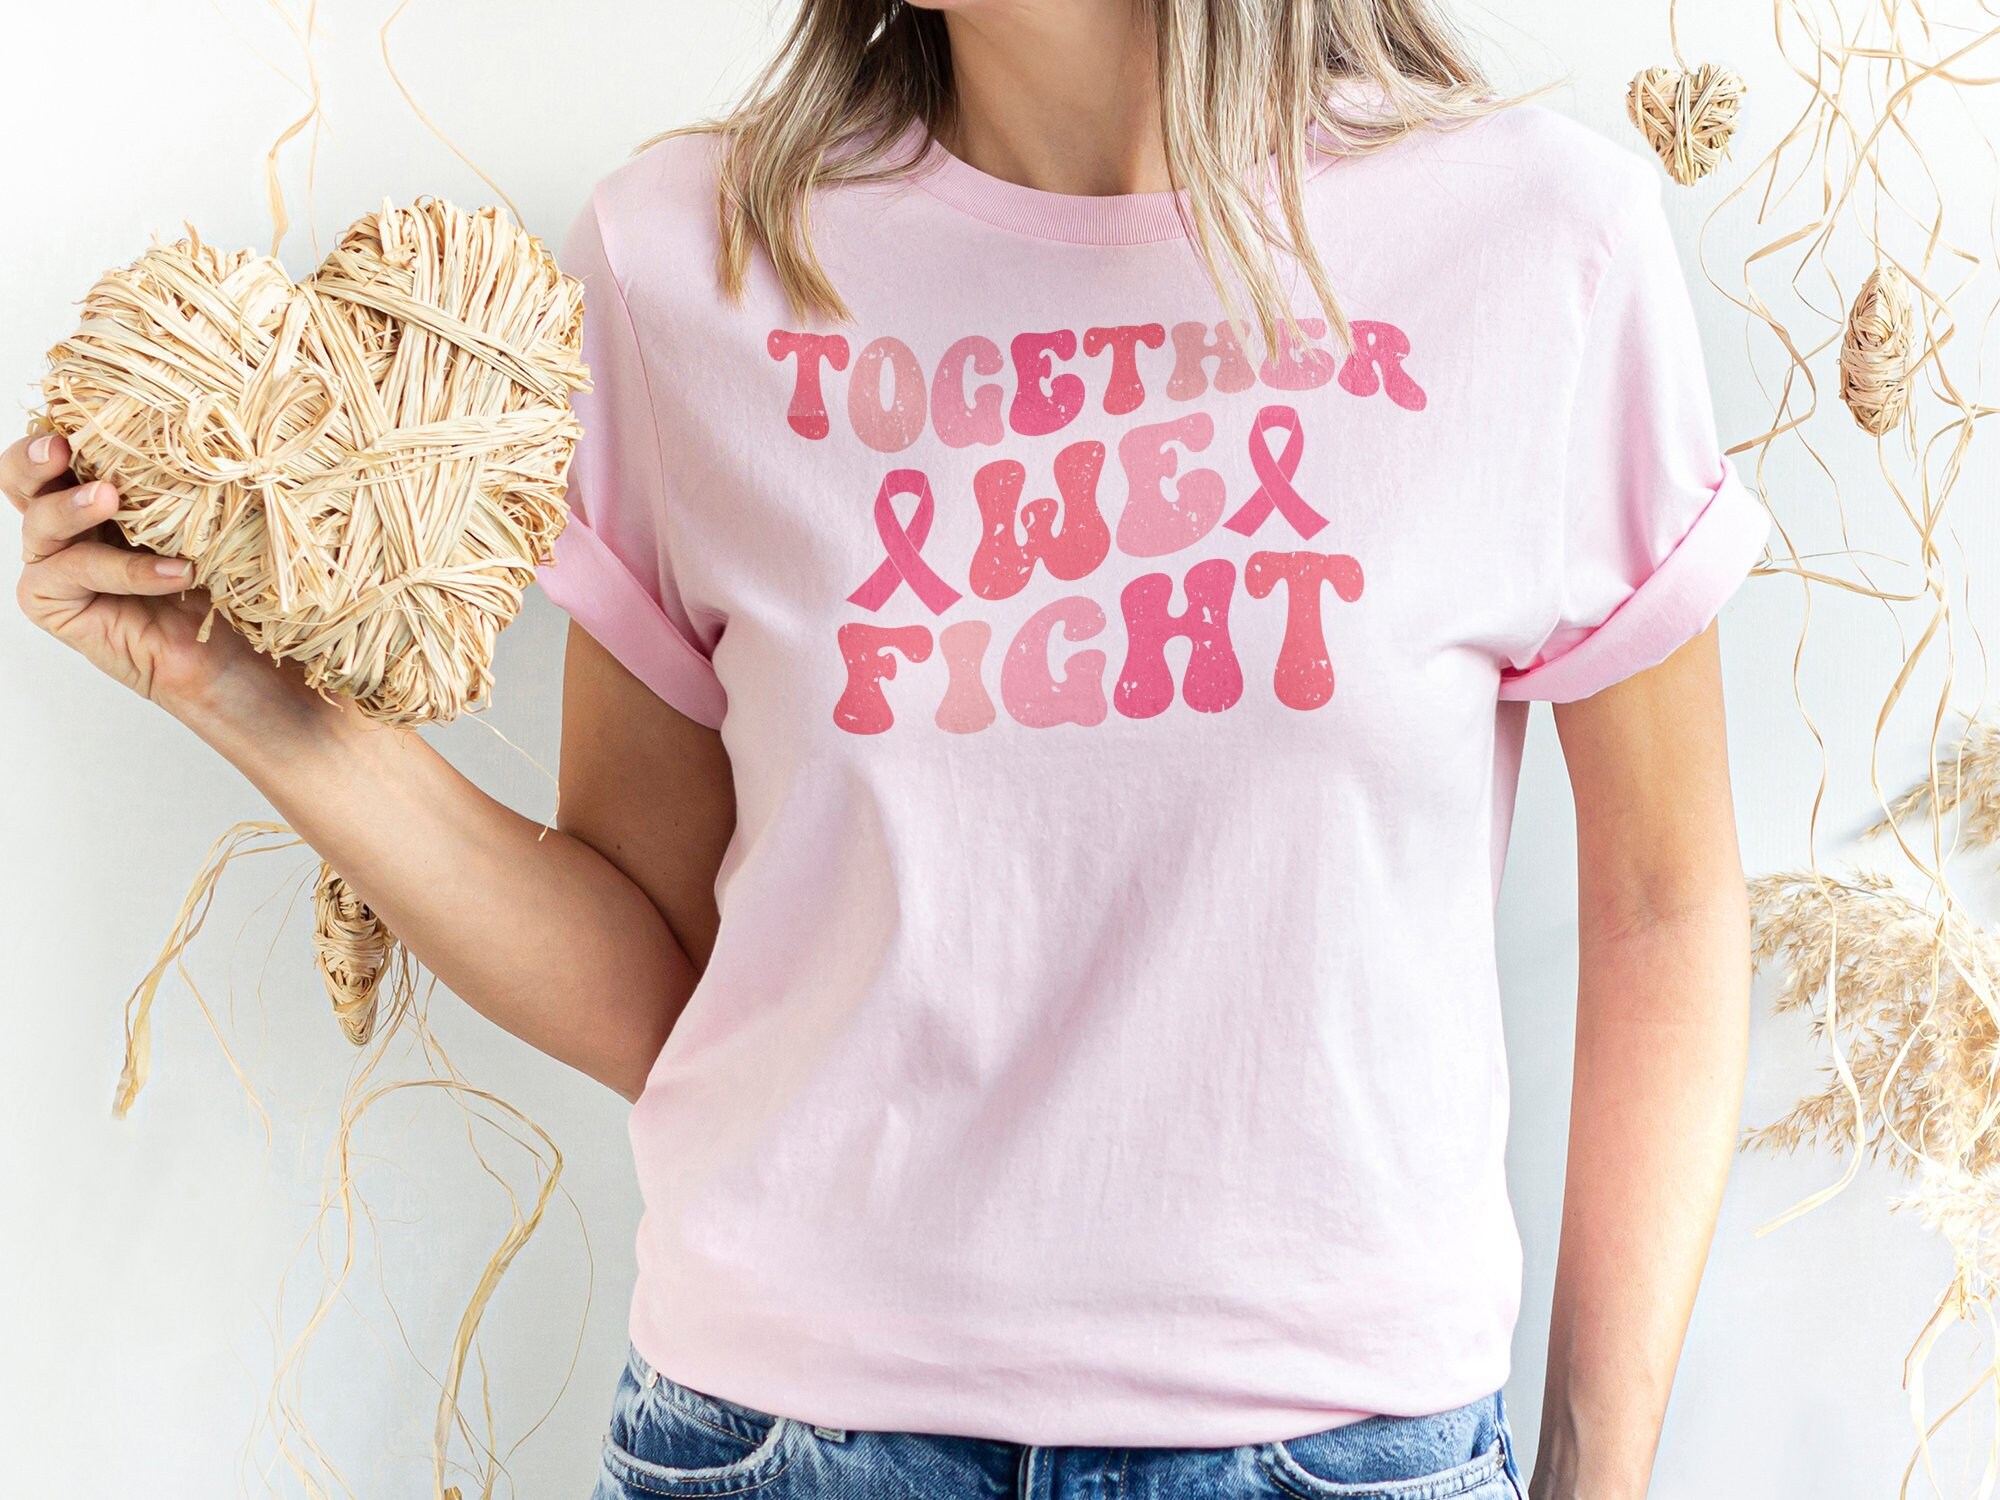 Discover Together We Fight Shirt, Groovy Cancer Awareness Tee, Breast Cancer Outfit, Cancer Support Gift Ideas, Pink Ribbon T-Shirt (AP-WOME68)